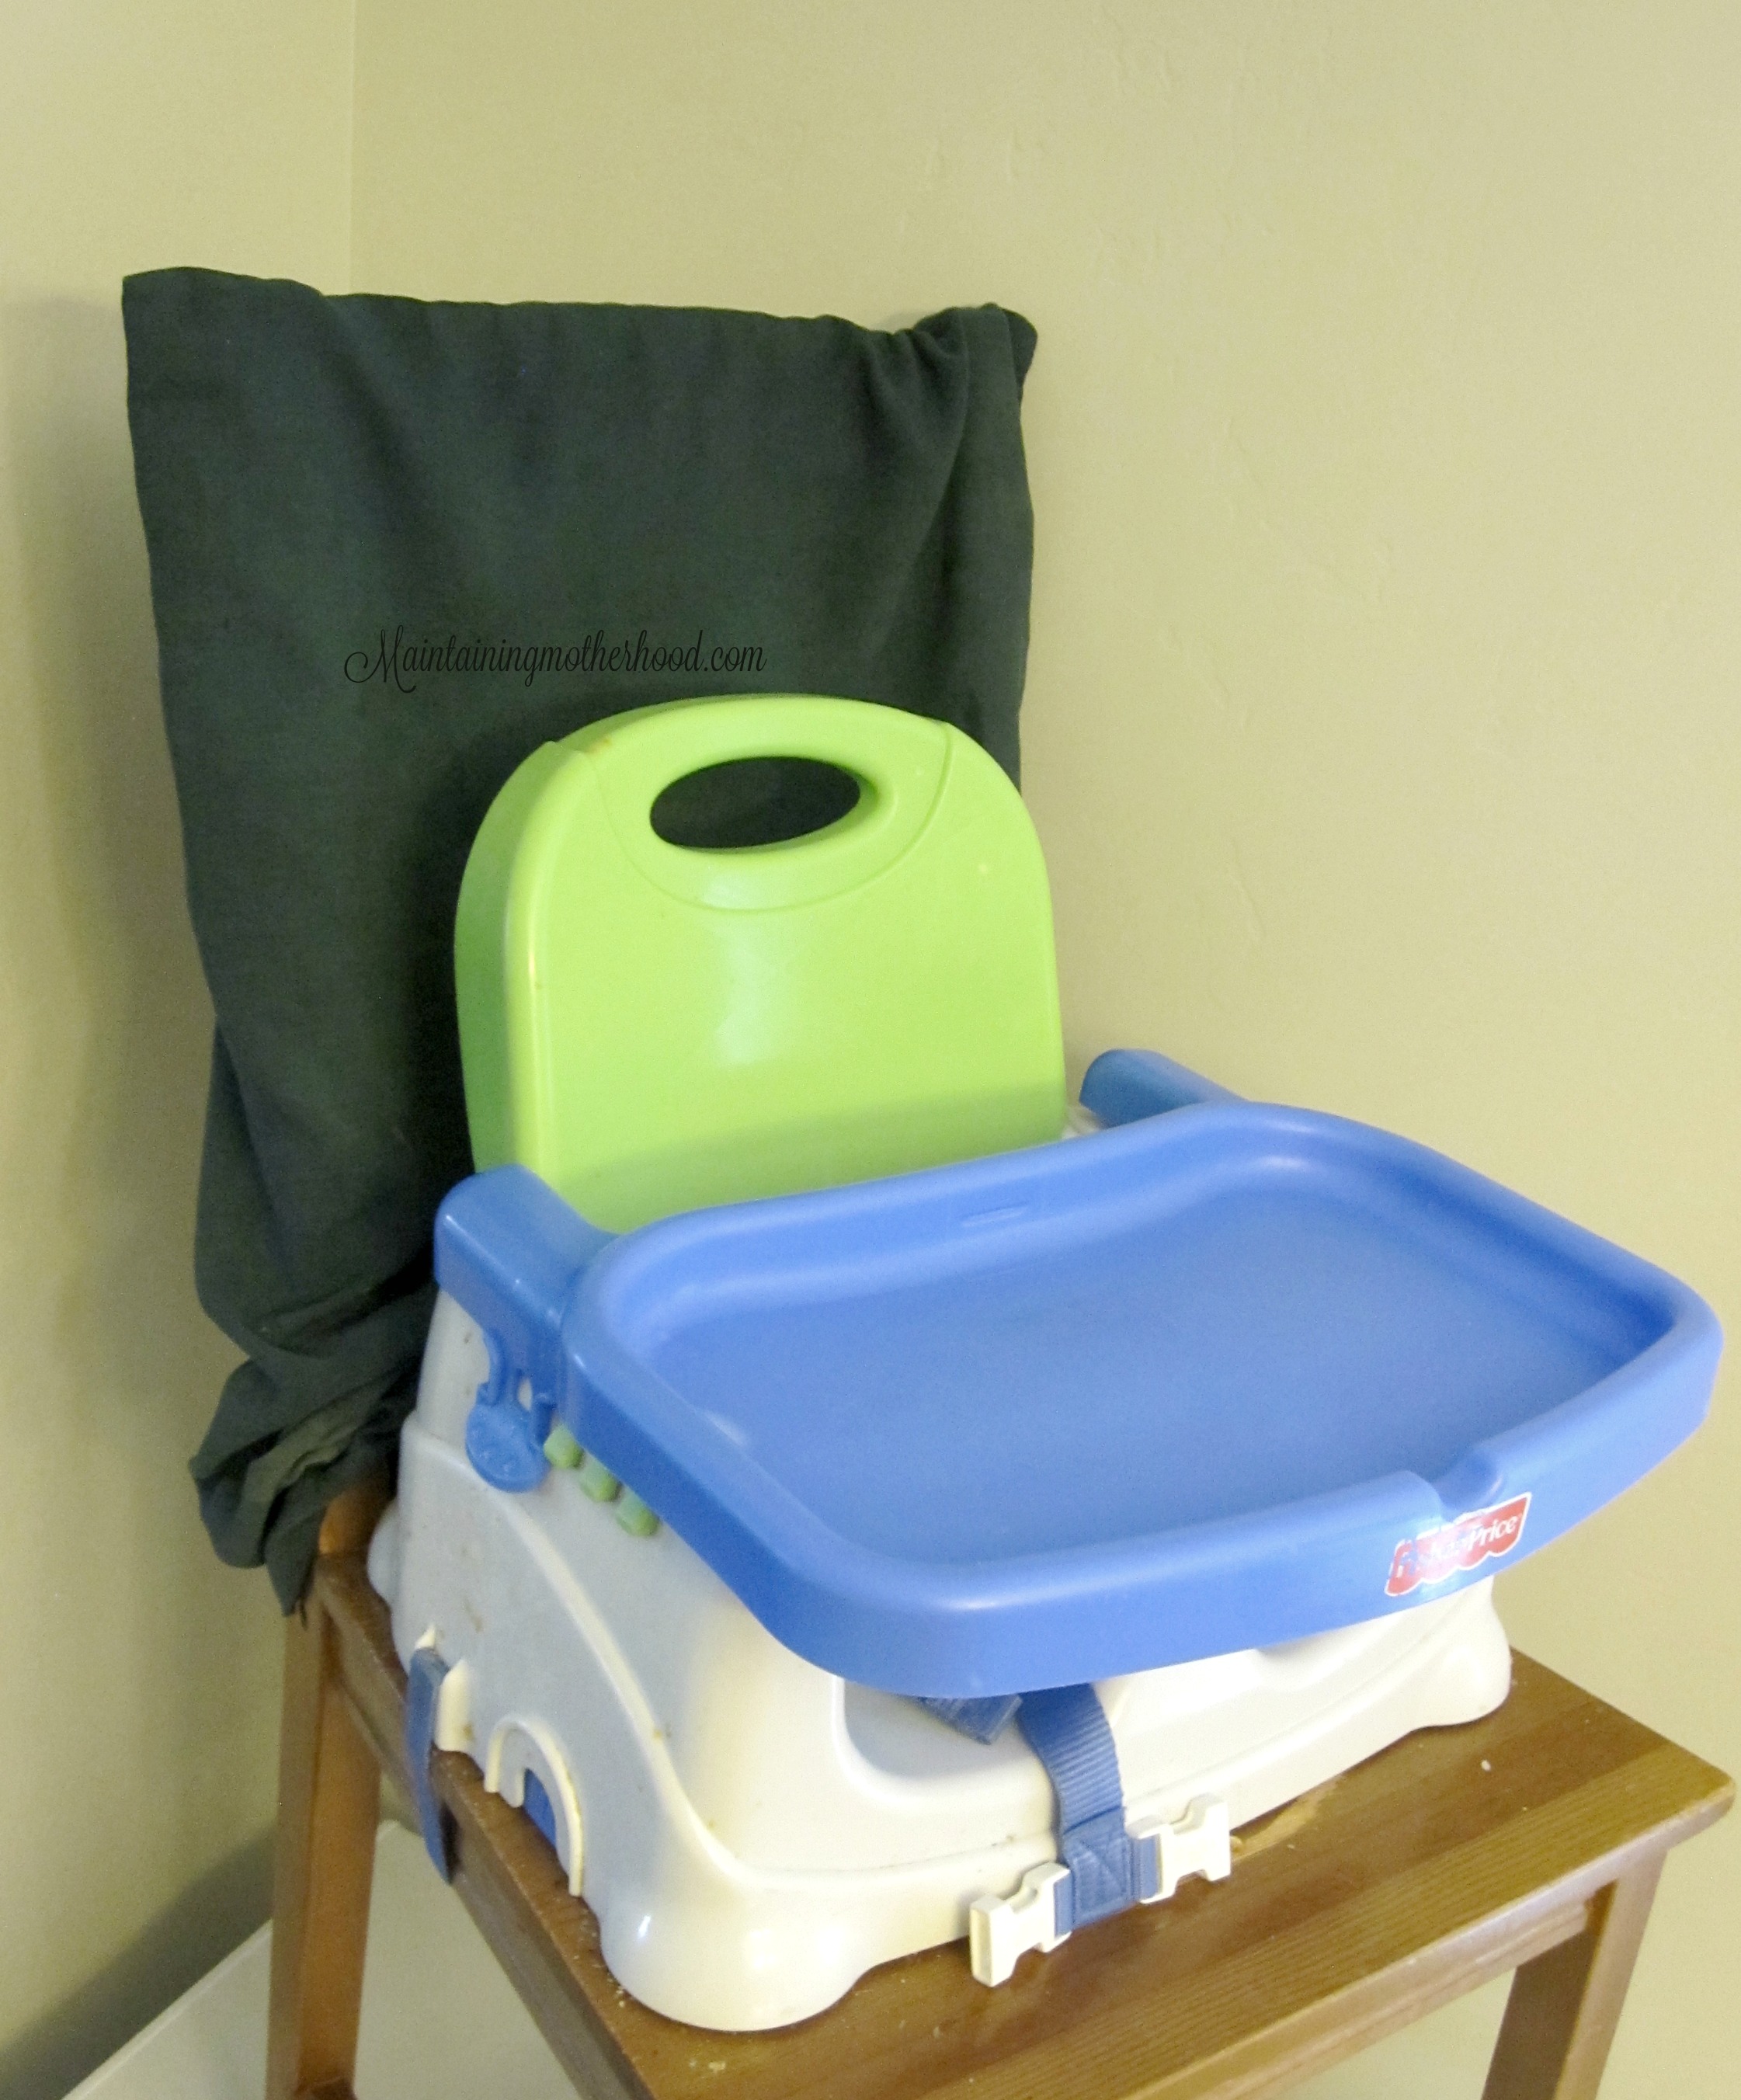 Kids are messy eaters. Using easy-to-clean chair covers reduces the amount of clean up after meals, and the scrub-down-the chairs rush before guests.